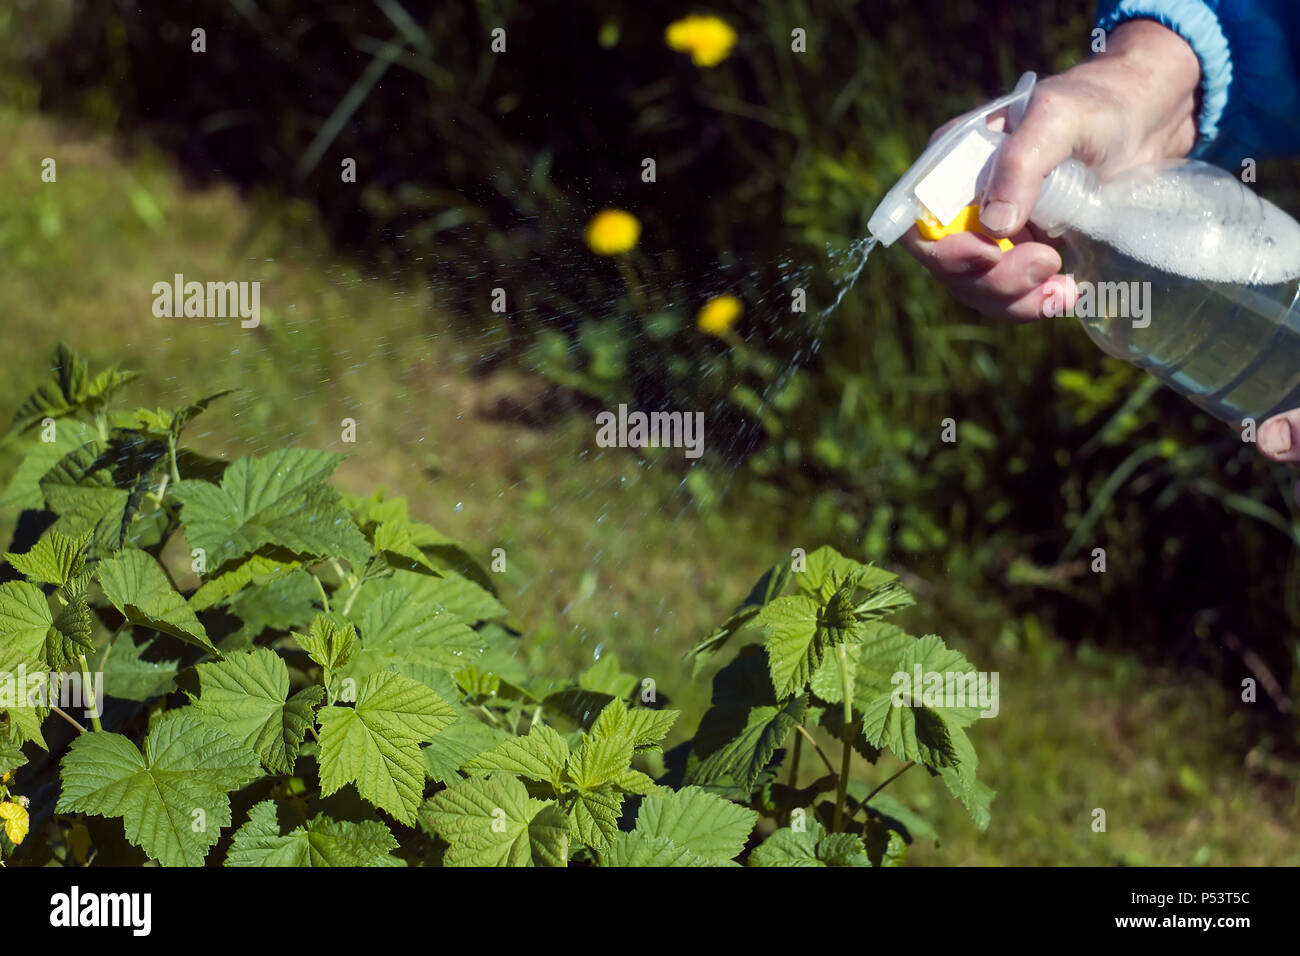 Fighting aphids in the garden using a pesticide solution Stock Photo